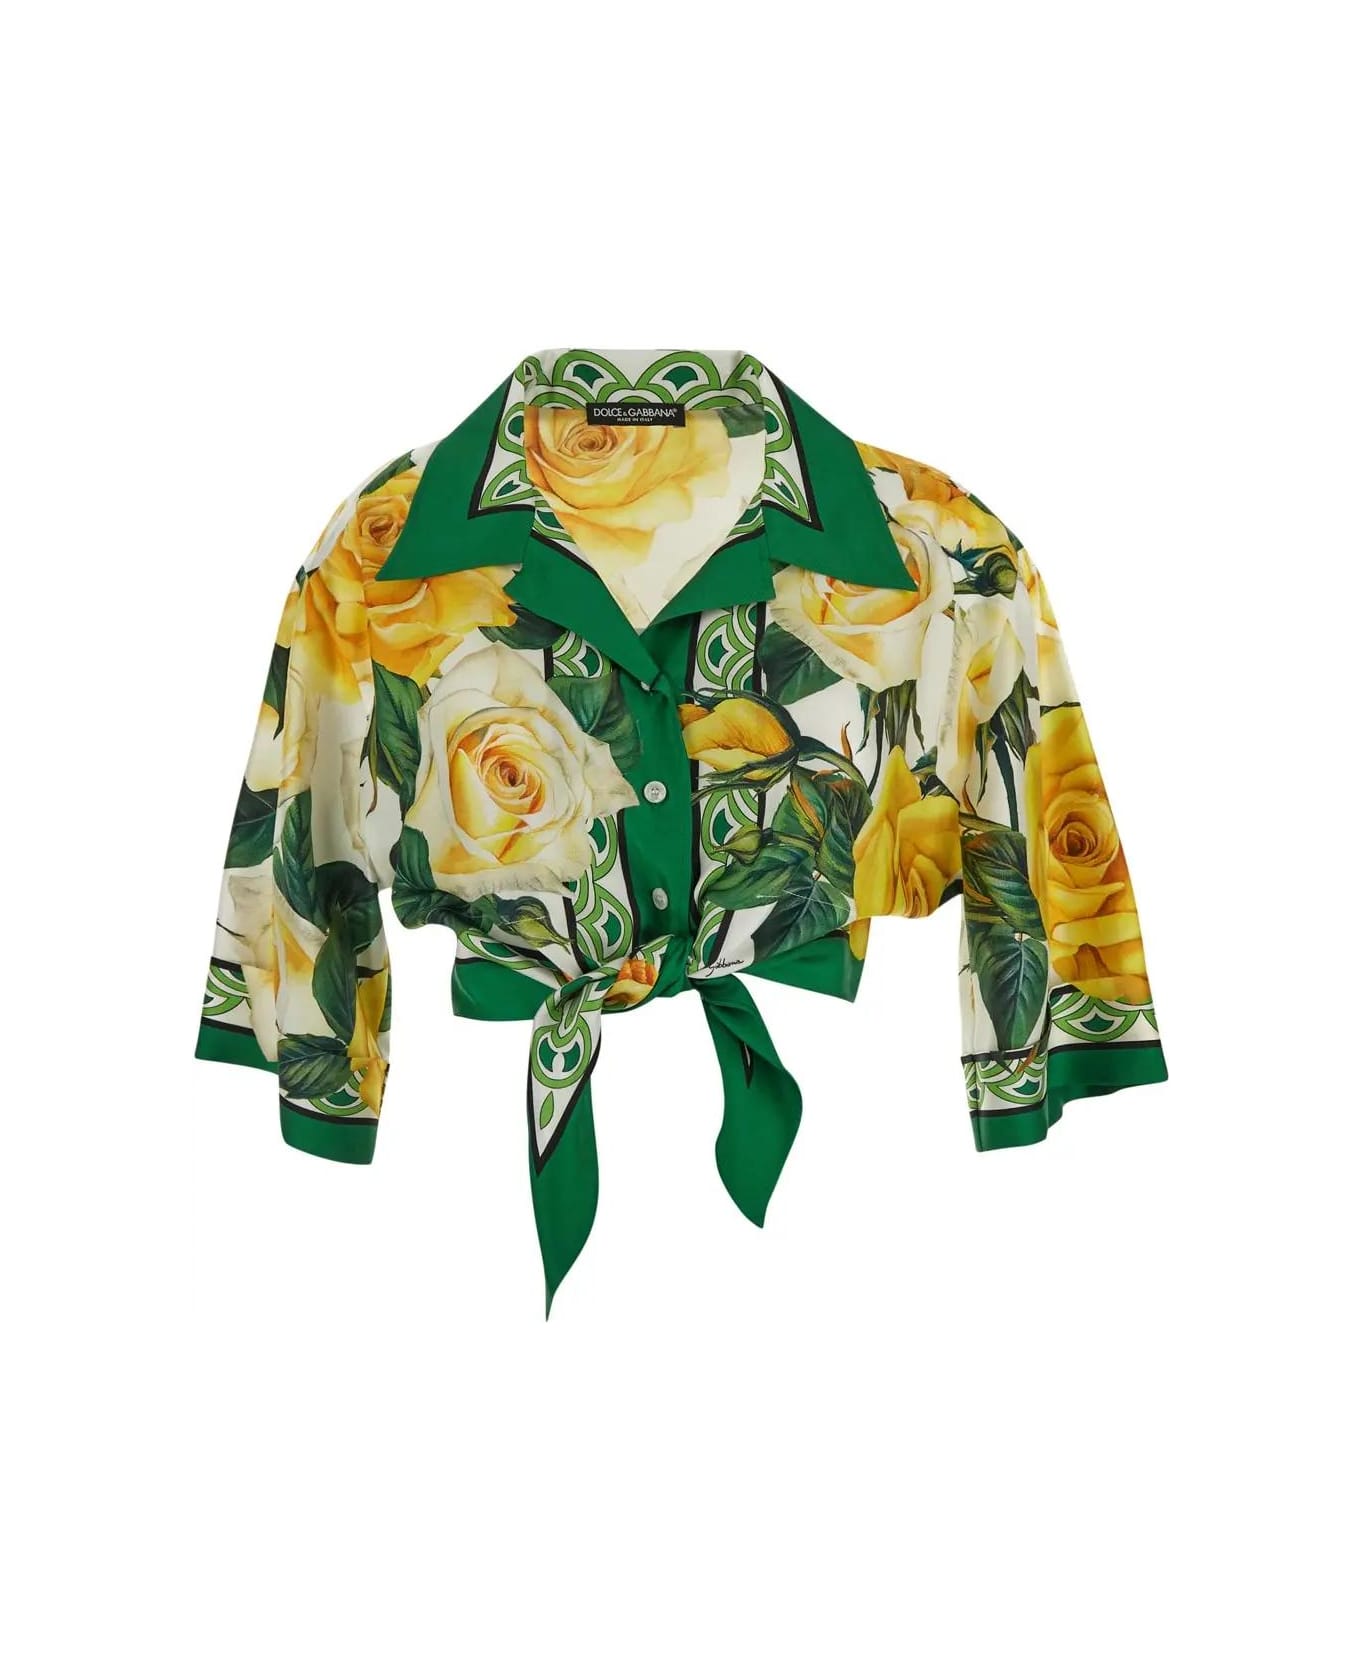 Dolce & Gabbana Floral Printed Tie Fastened Shirt - Multicolor